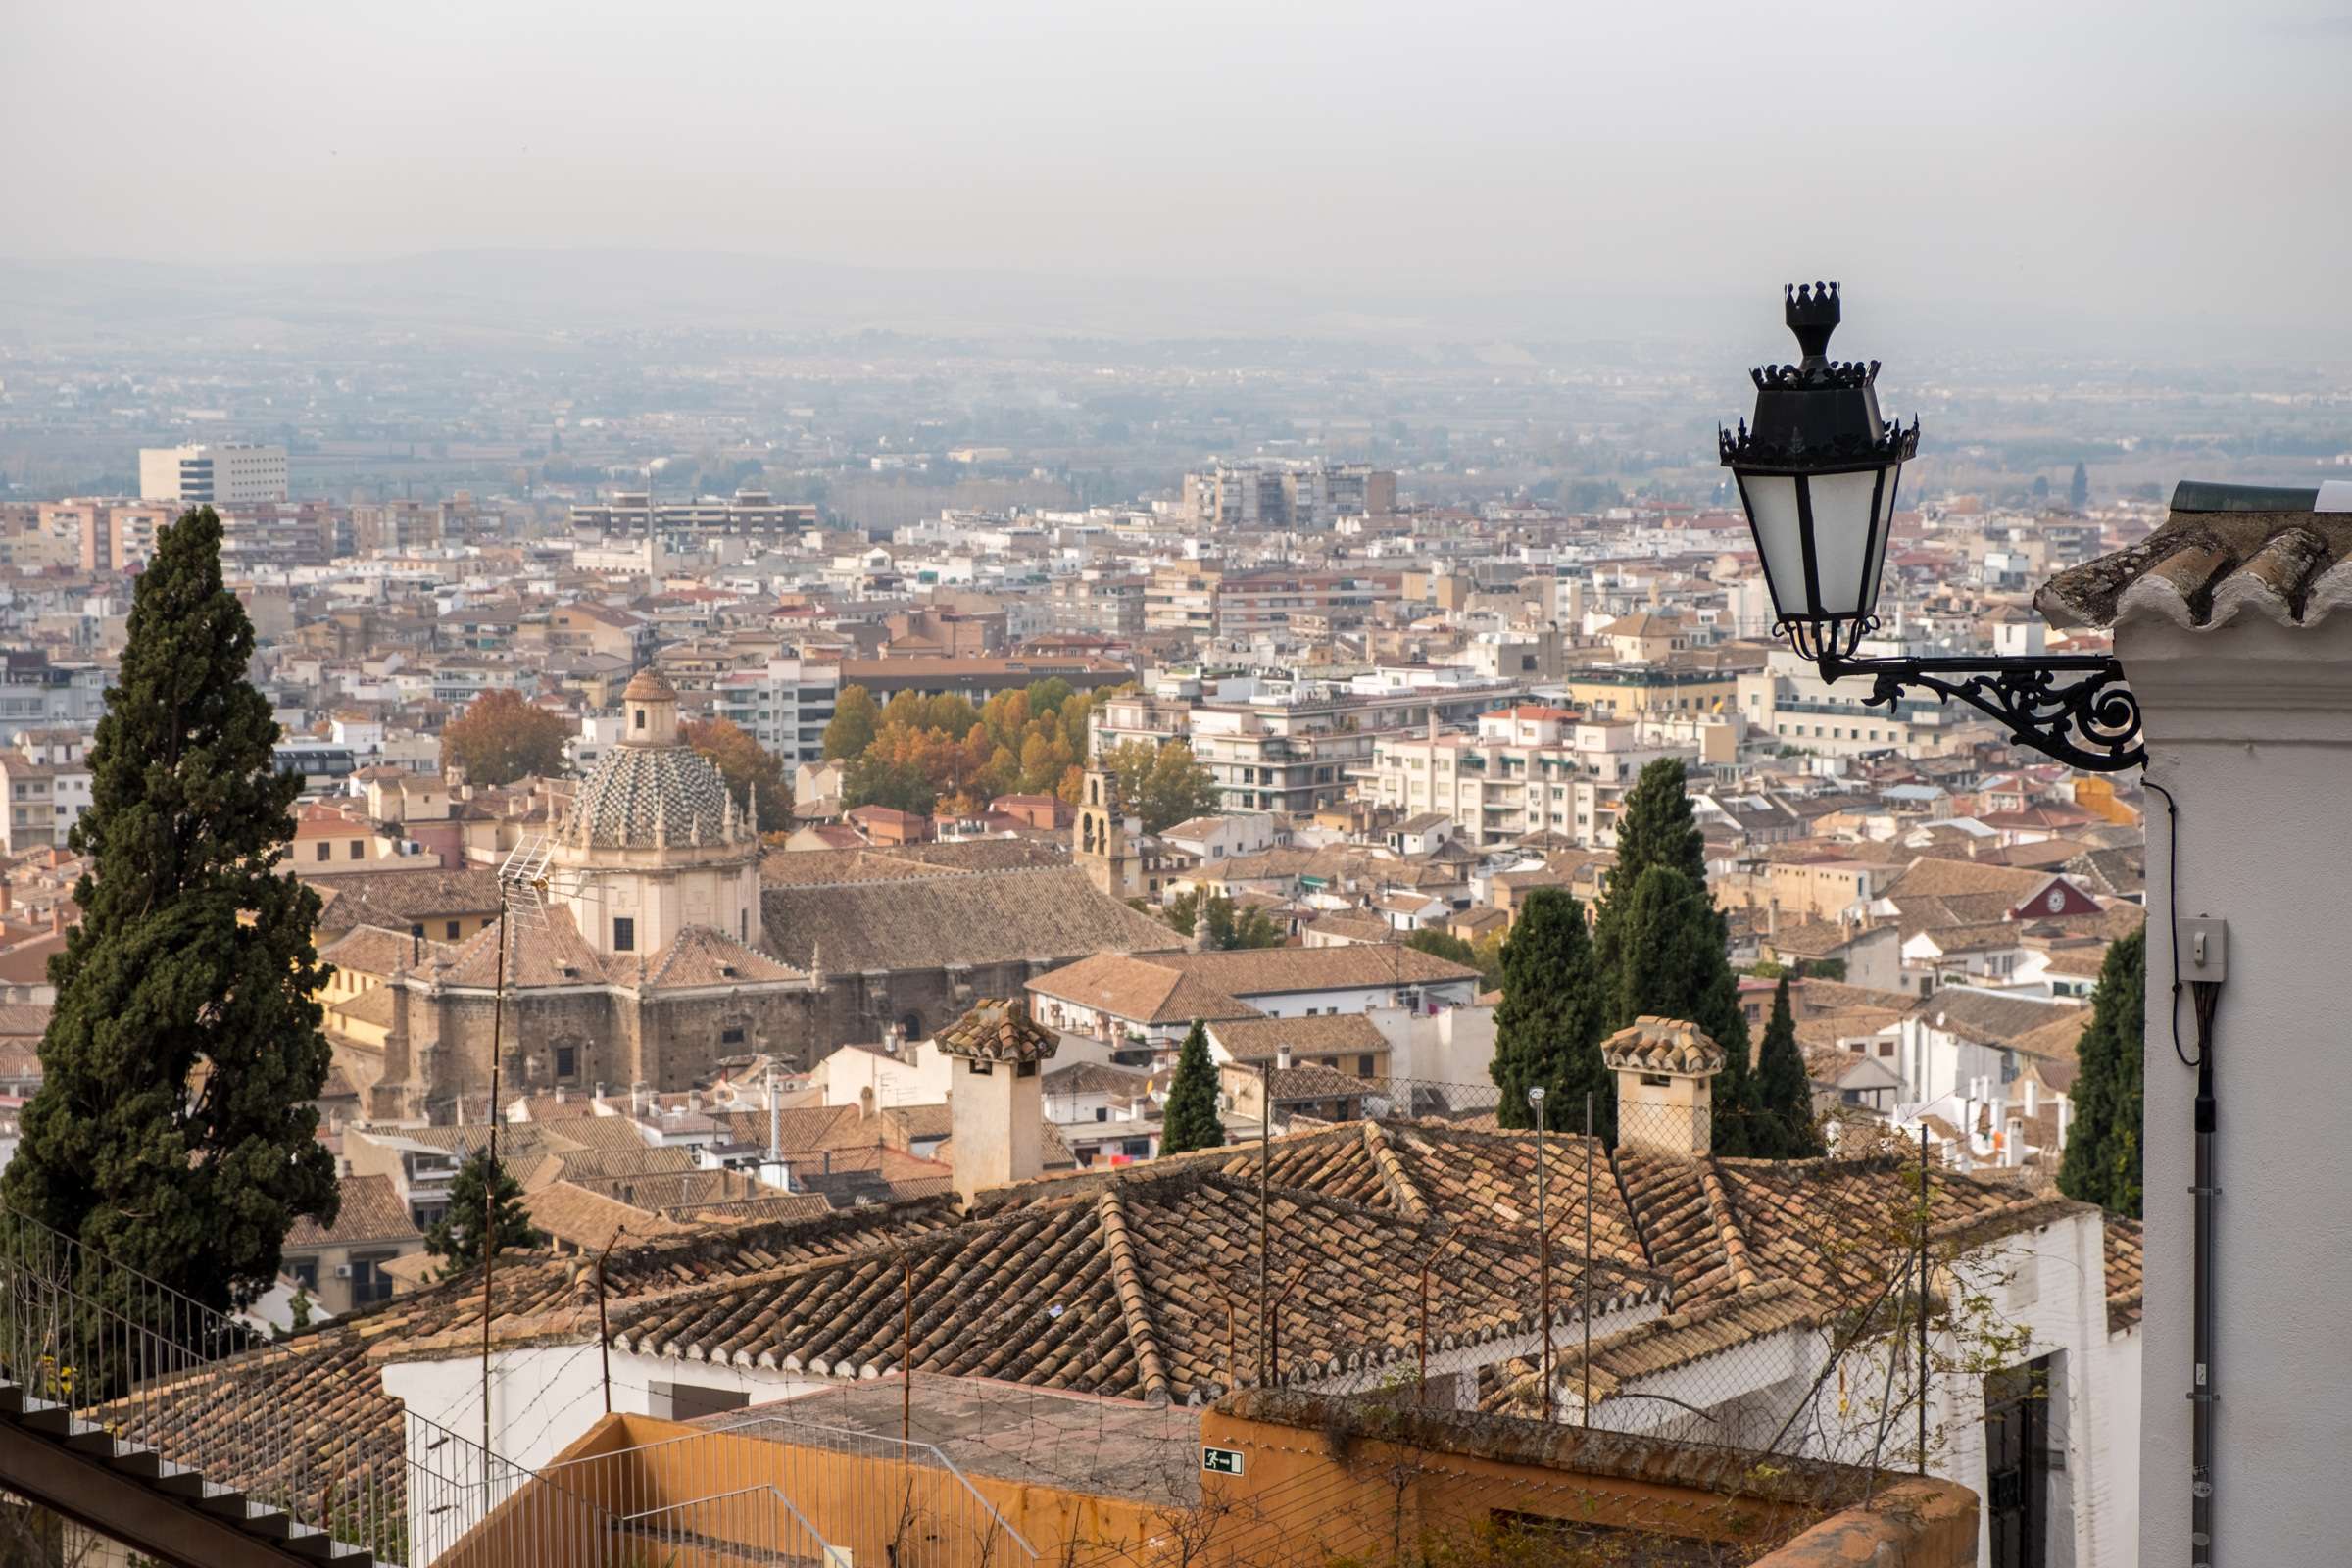 The view over Granada from Hotel Alhambra Palace